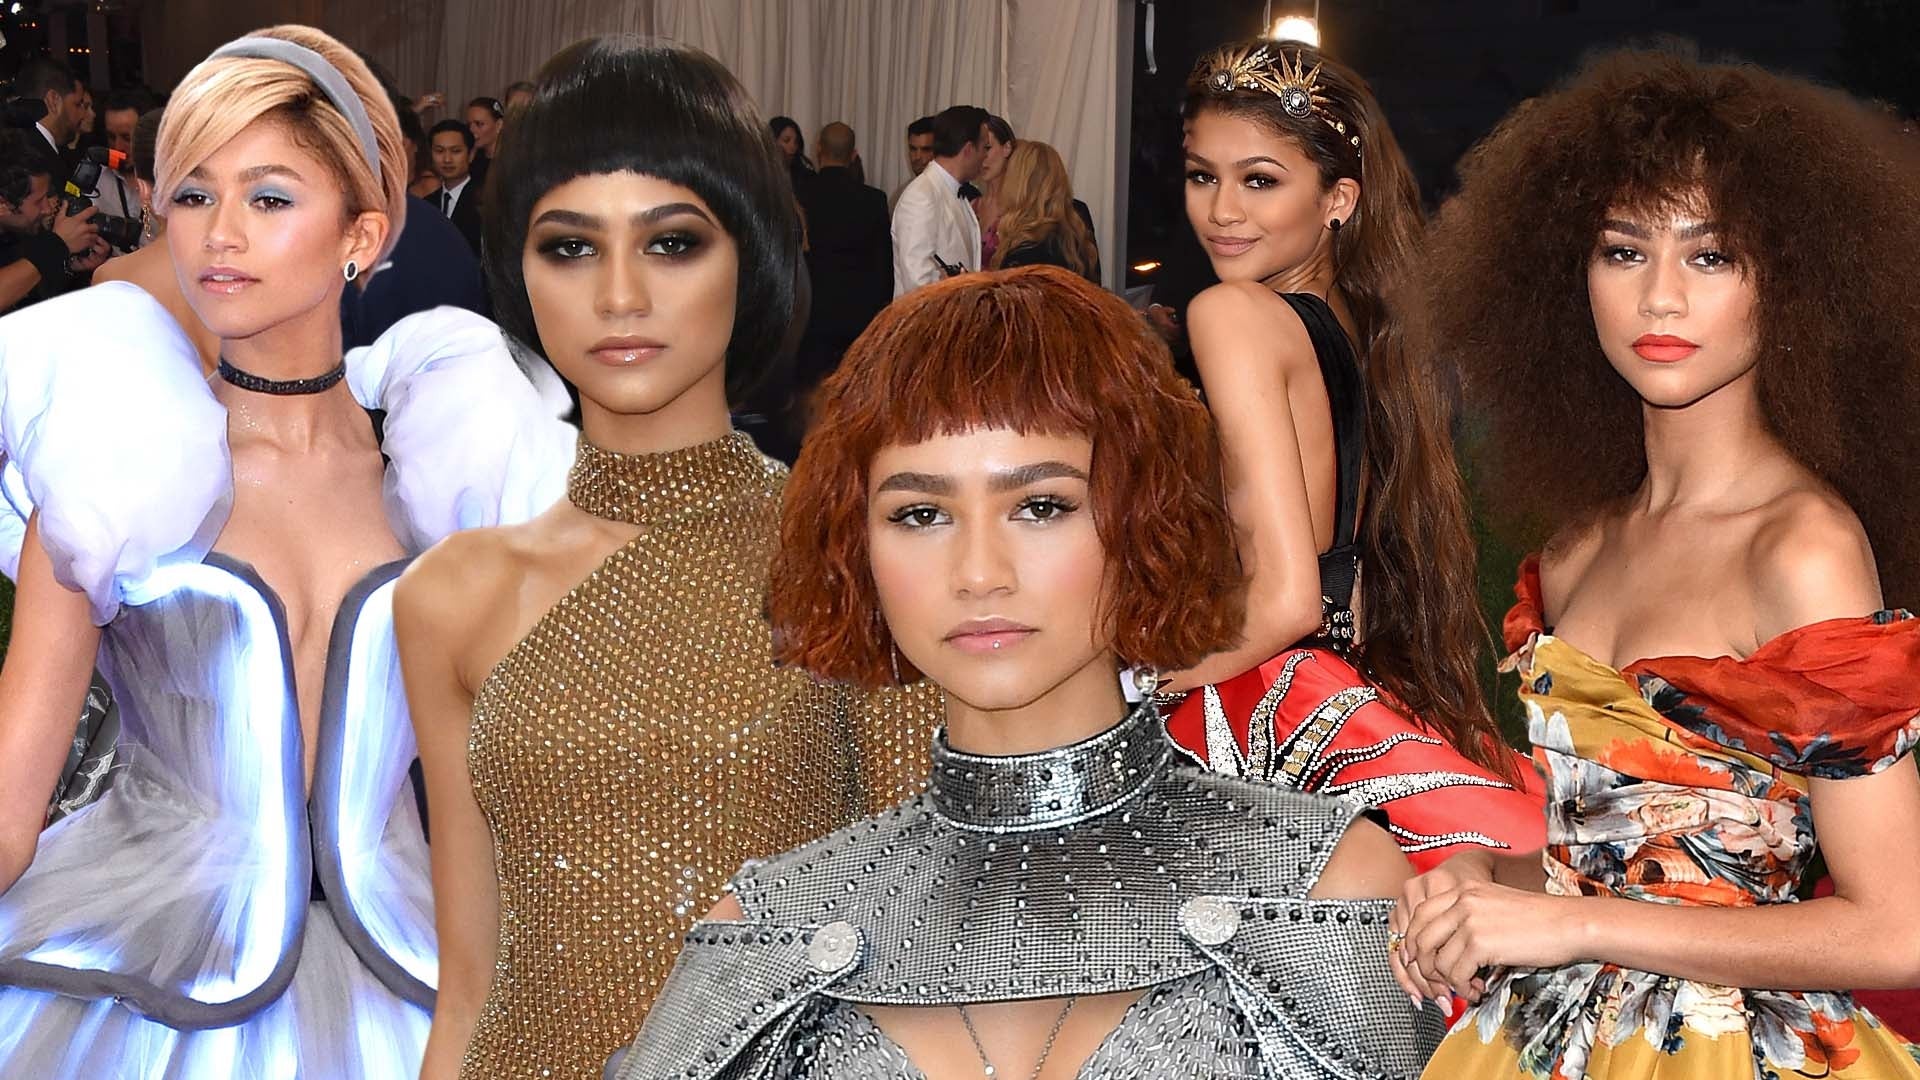 Zendaya at the Met Gala: See Her Style Evolution